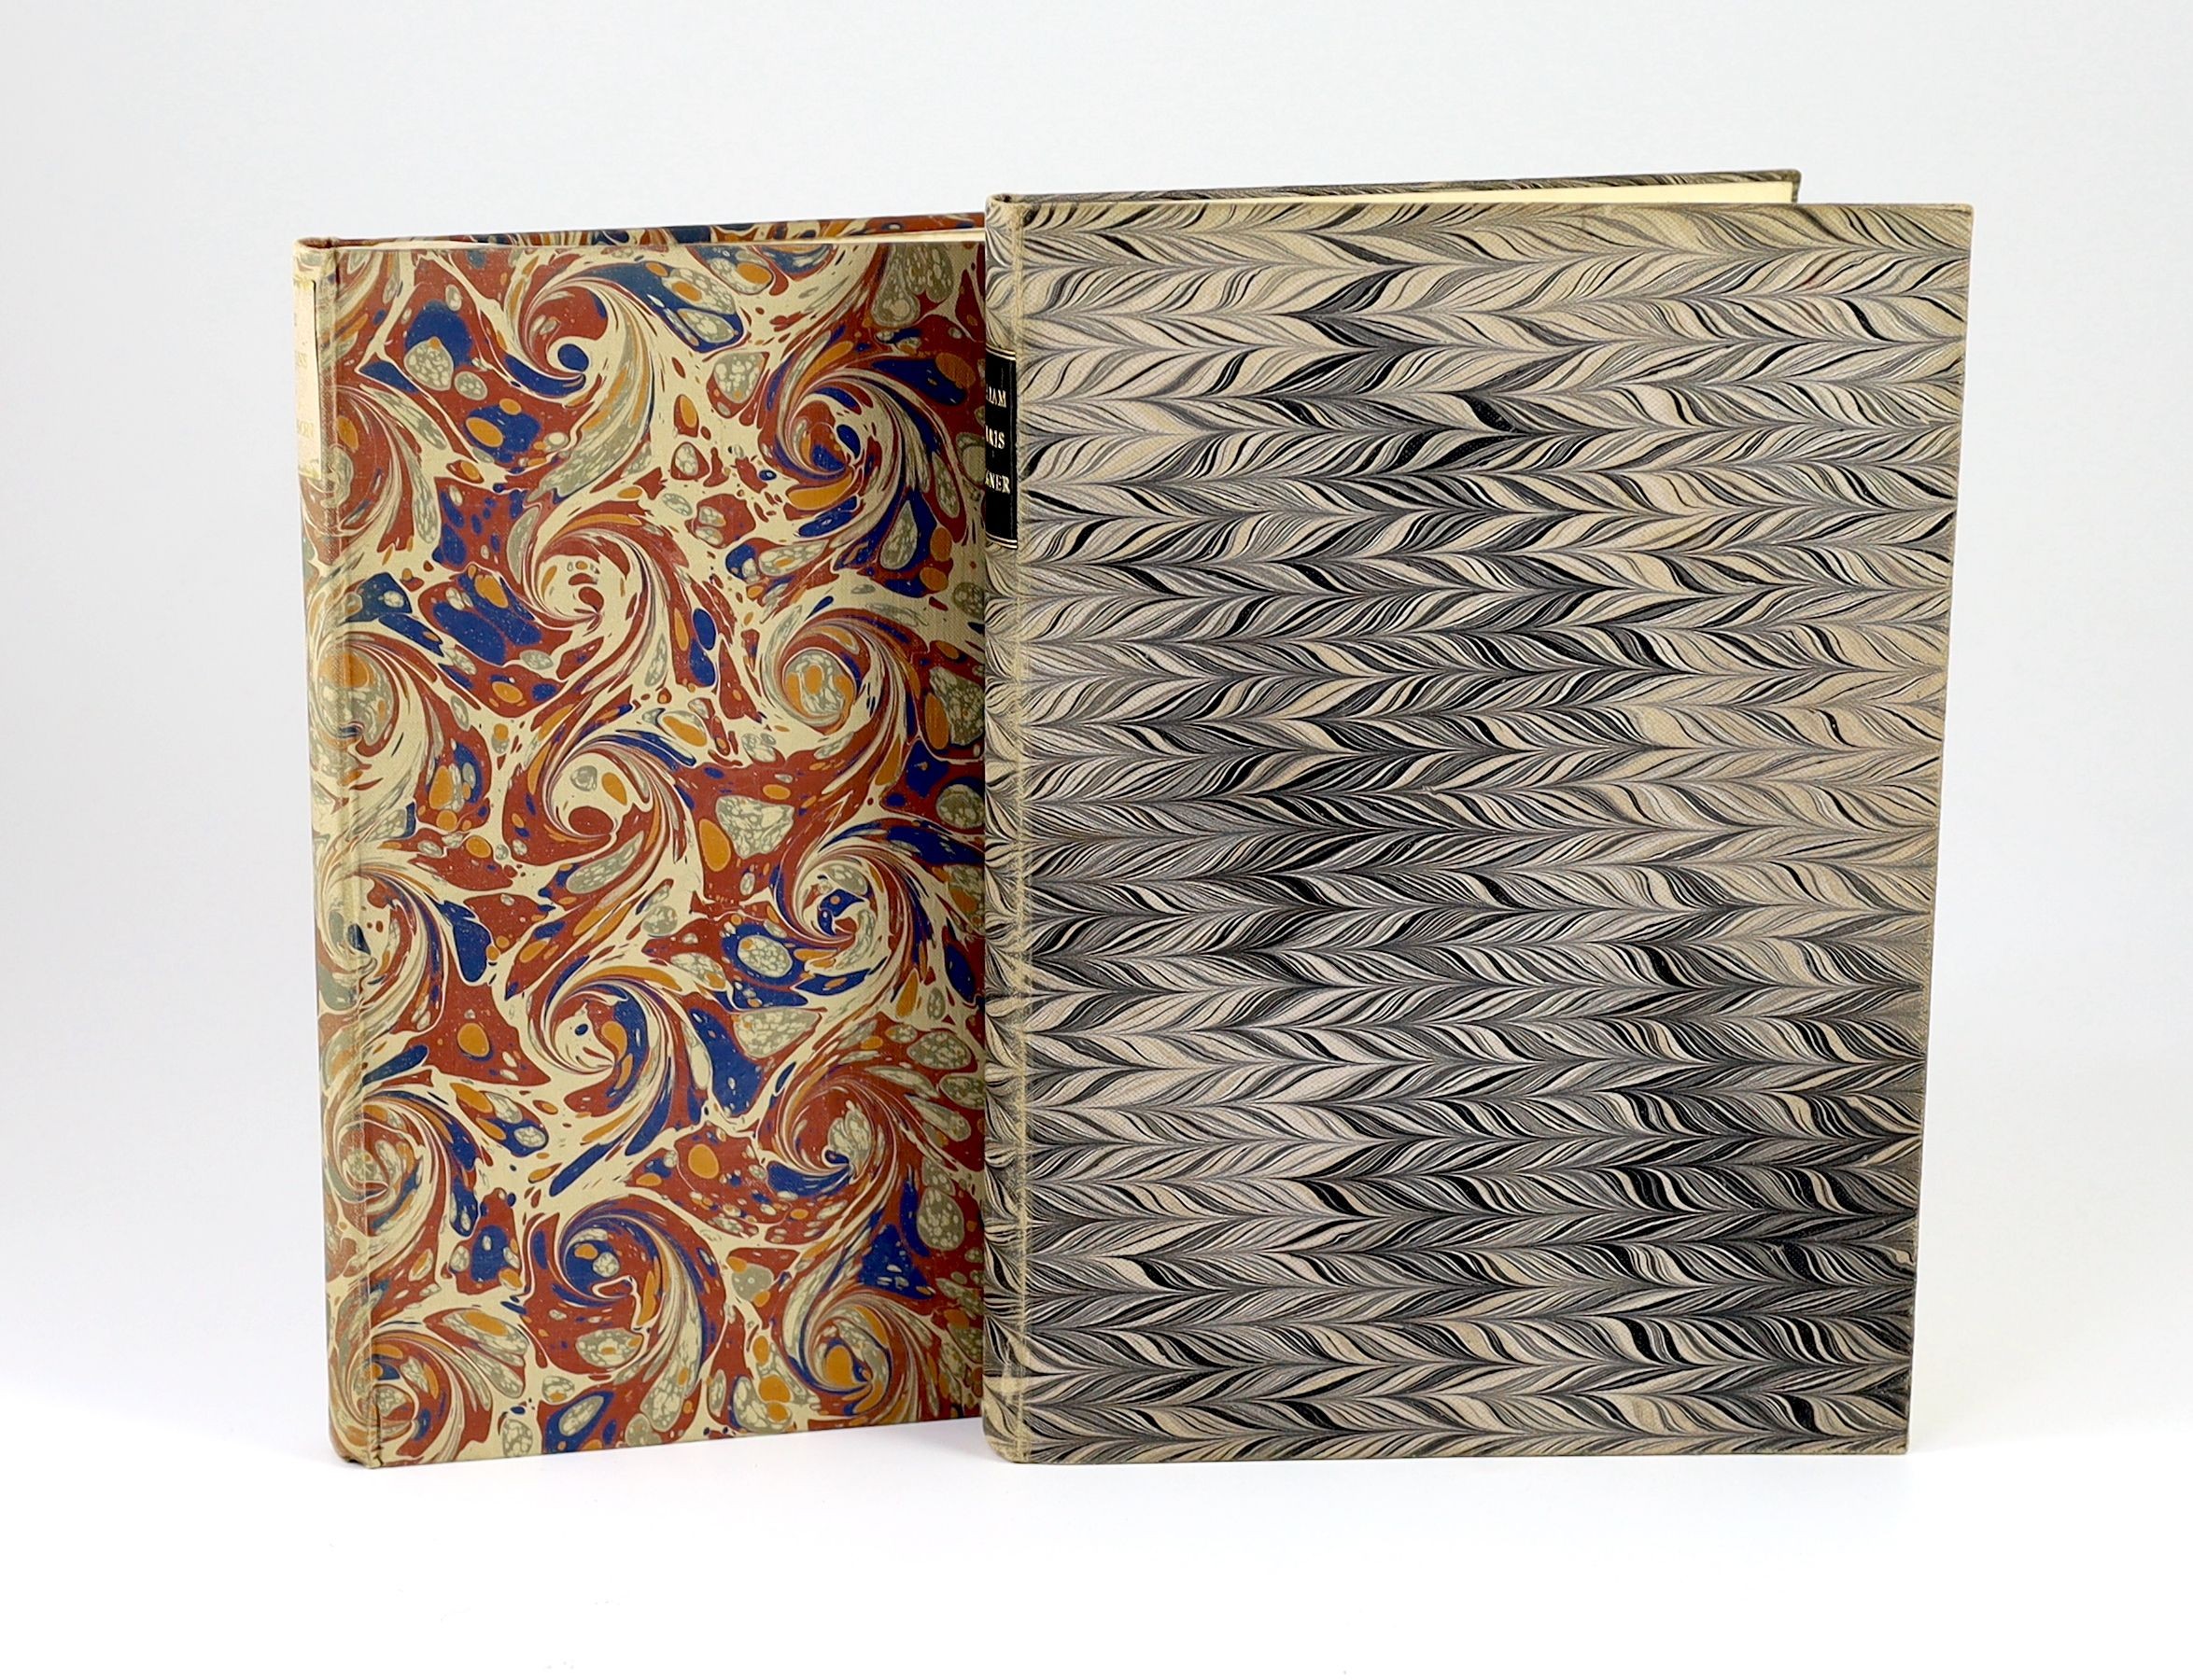 Nonesuch Press - Thomson, James - The Seasons, one of 1500, 4to, marble boards, illustrated by Jacquier, London, 1927 and Crow, Gerald Henry - William Morris Designer, 4to, cloth, The Studio, London, 1934